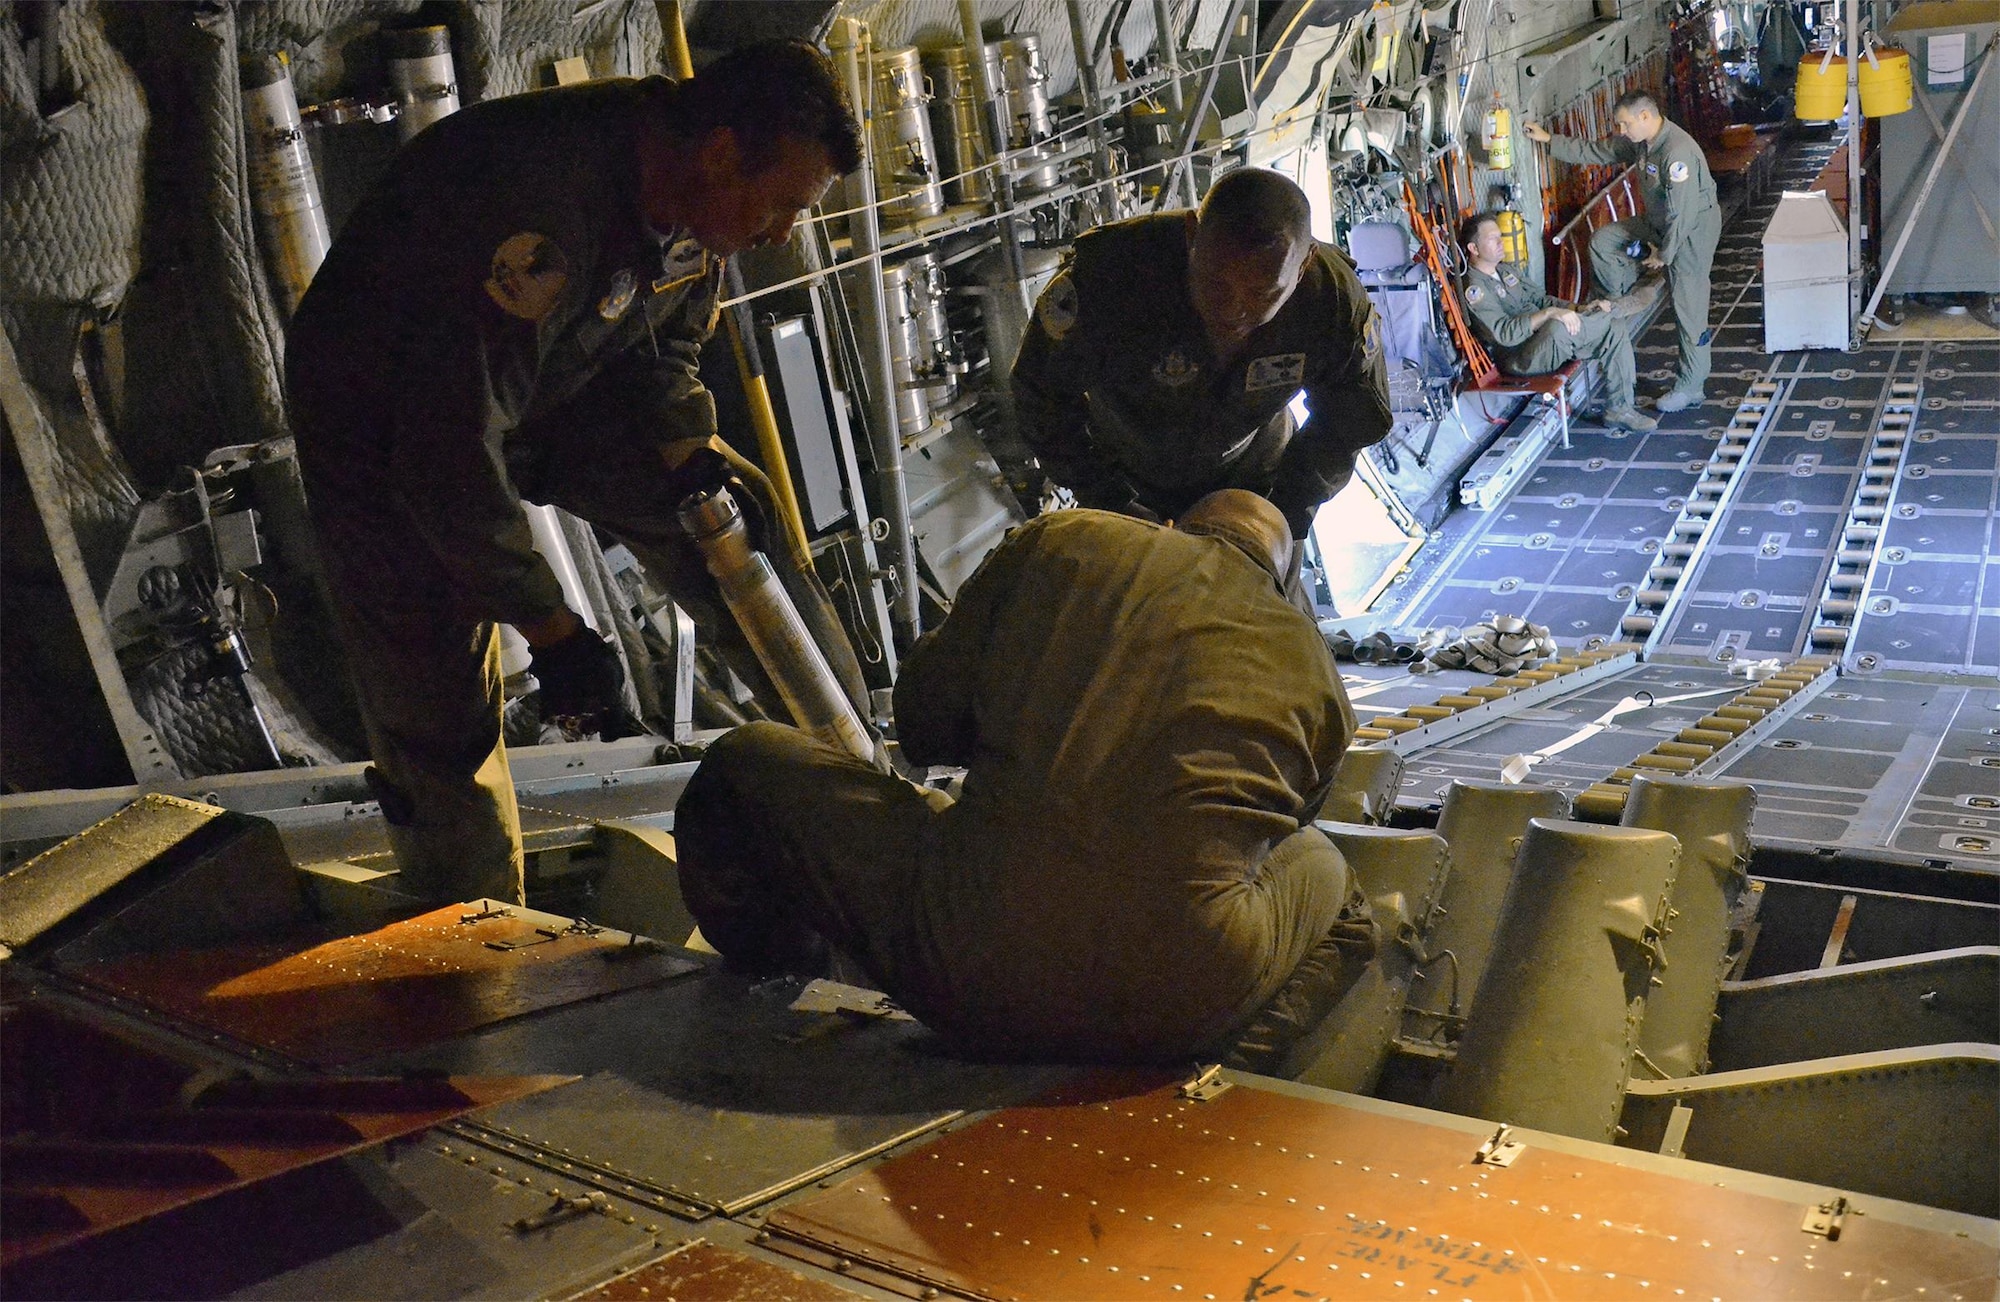 PATRICK AIR FORCE BASE, Fla. -- Air Force Reserve aircrew members load cannisters of sea dye into the flare launcher system of an HC-130P/N King aircraft prior to launching a search-and-rescue mission. The dye, which spreads into a large, bright flourescent green patch in seawater, is used to mark the location of a survivor during a search operation. The reservists are members of the 920th Rescue Wing, the Air Force Reserve’s only rescue unit. (U.S. Air Force photo/Master Sgt. Paul Flipse) 